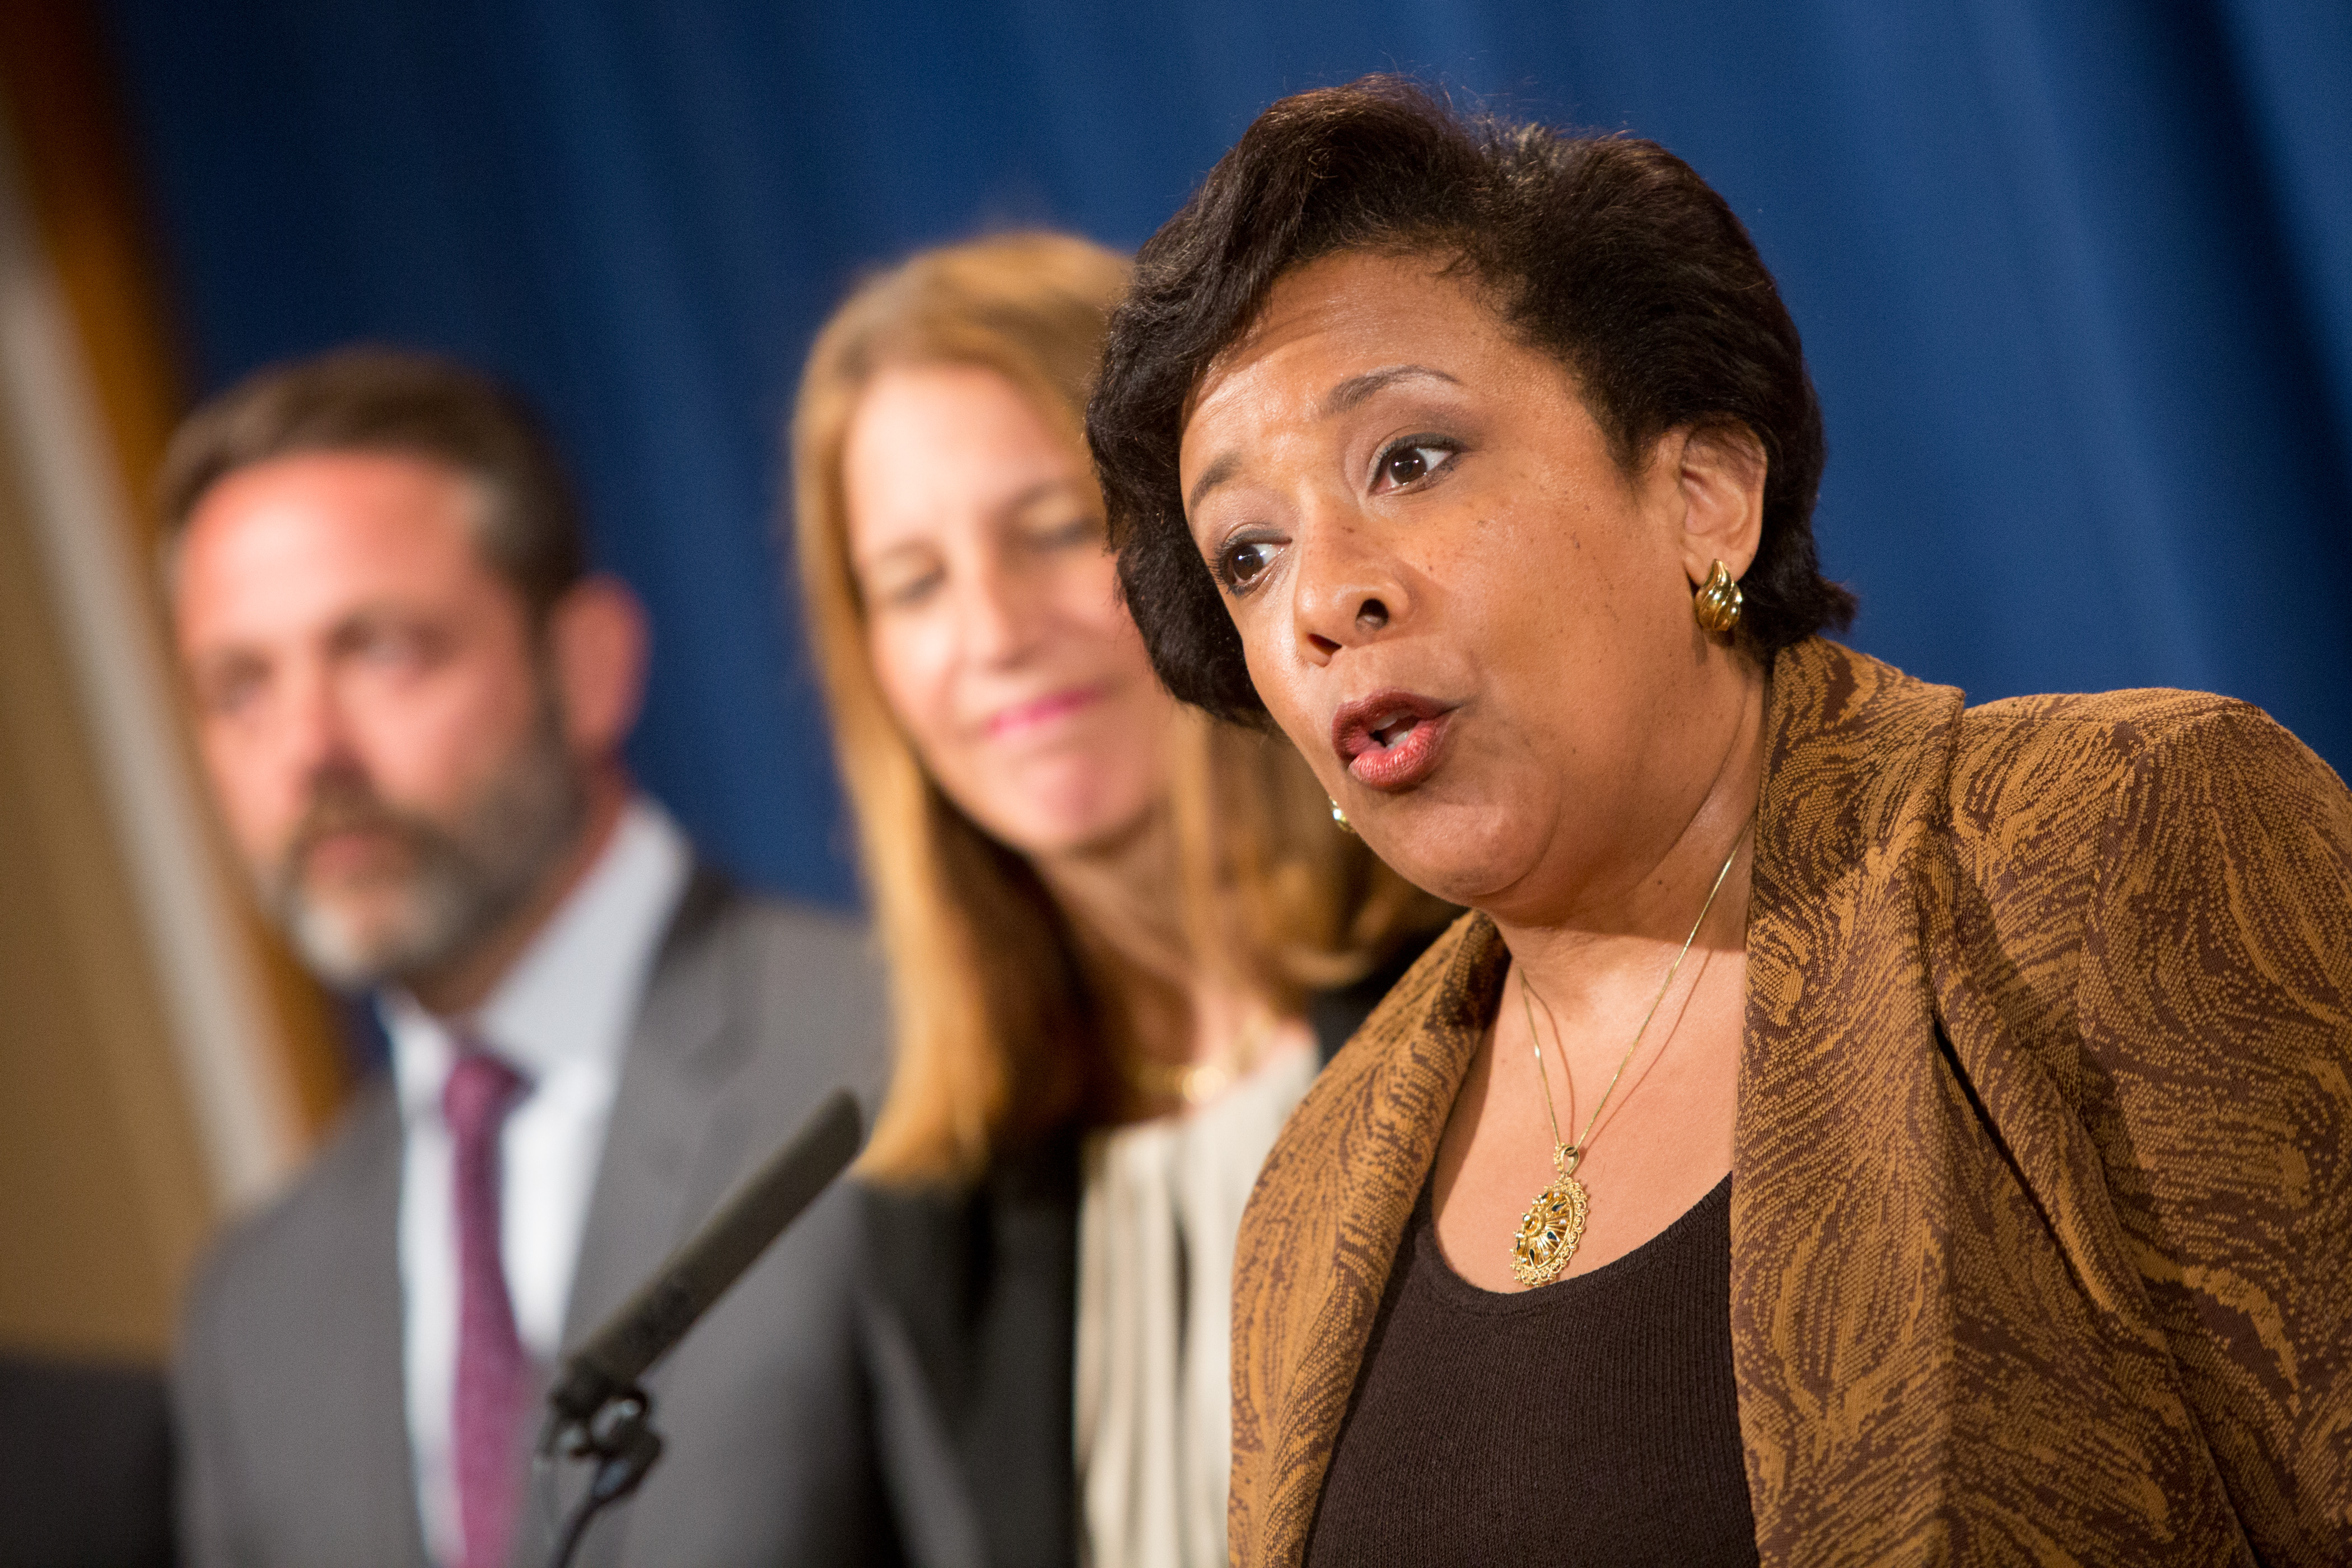 Attorney General Loretta E. Lynch speaks at a press conference in Washington, D.C. on June 22, 2016. (Allison Shelley—Getty Images)